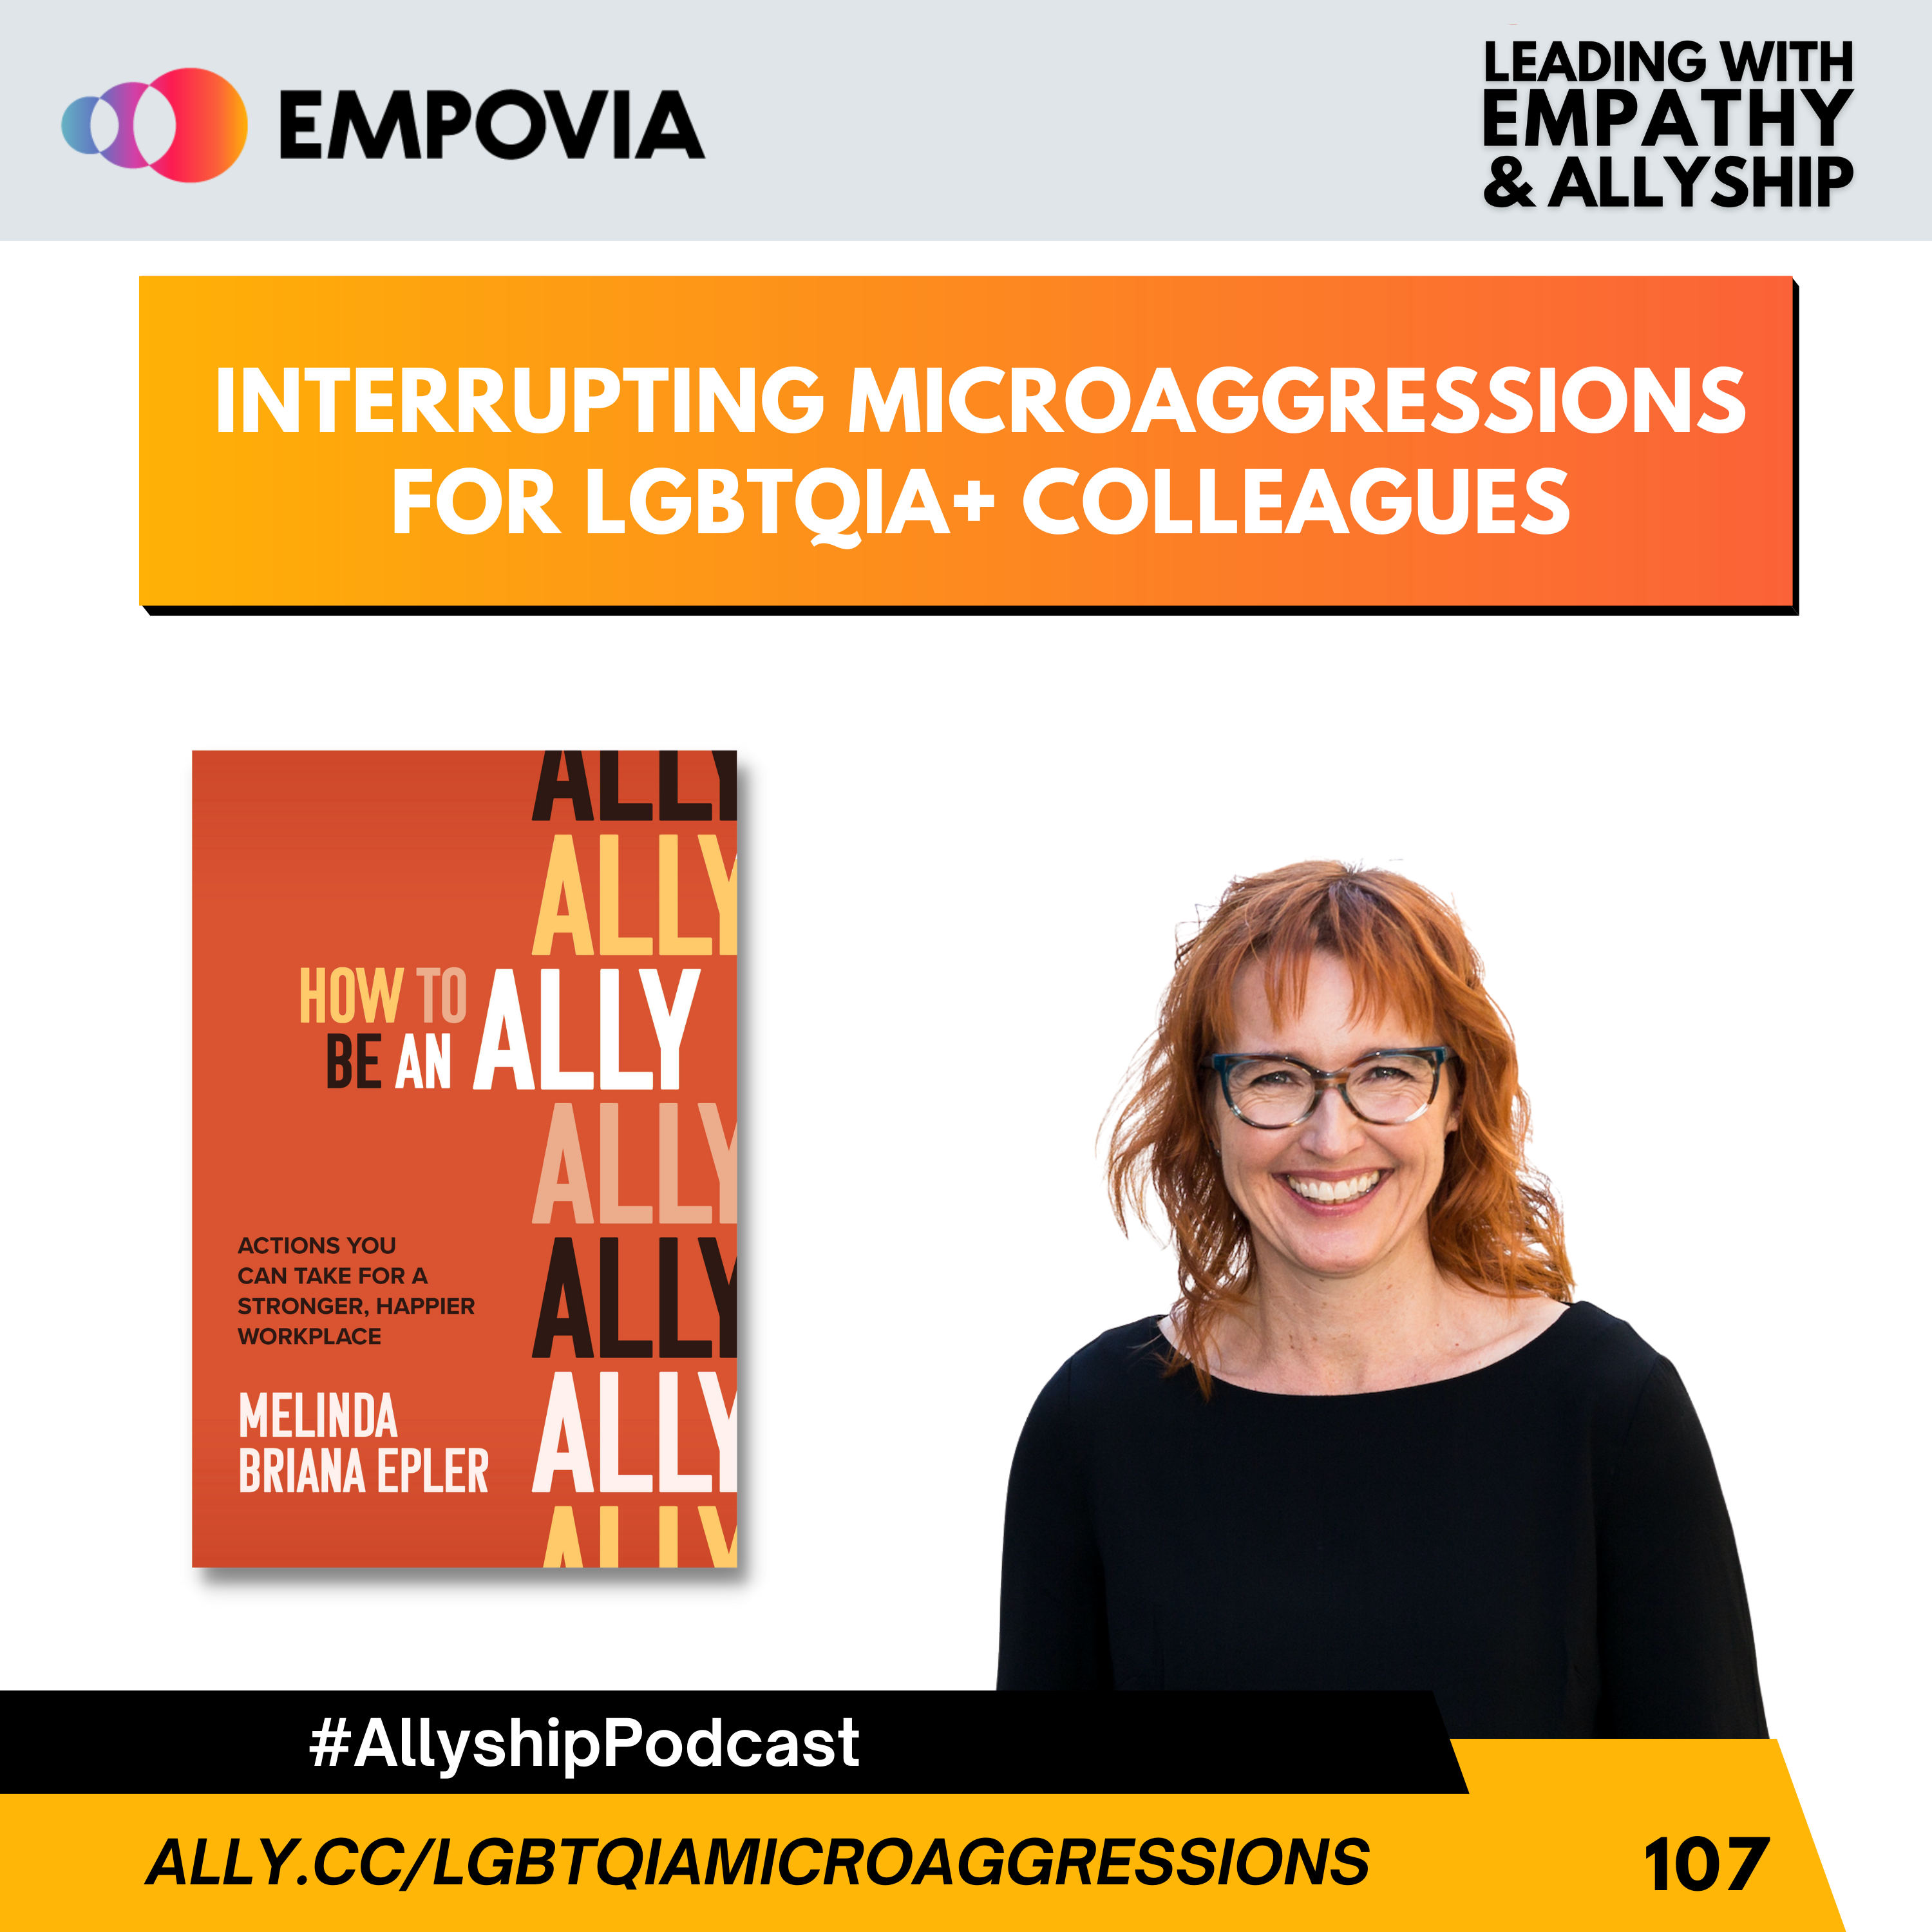 Leading With Empathy & Allyship promo and a photo of host Melinda Briana Epler, a White woman with red hair, glasses, and a black shirt; beside her is the orange book cover of How to Be an Ally (McGraw-Hill)